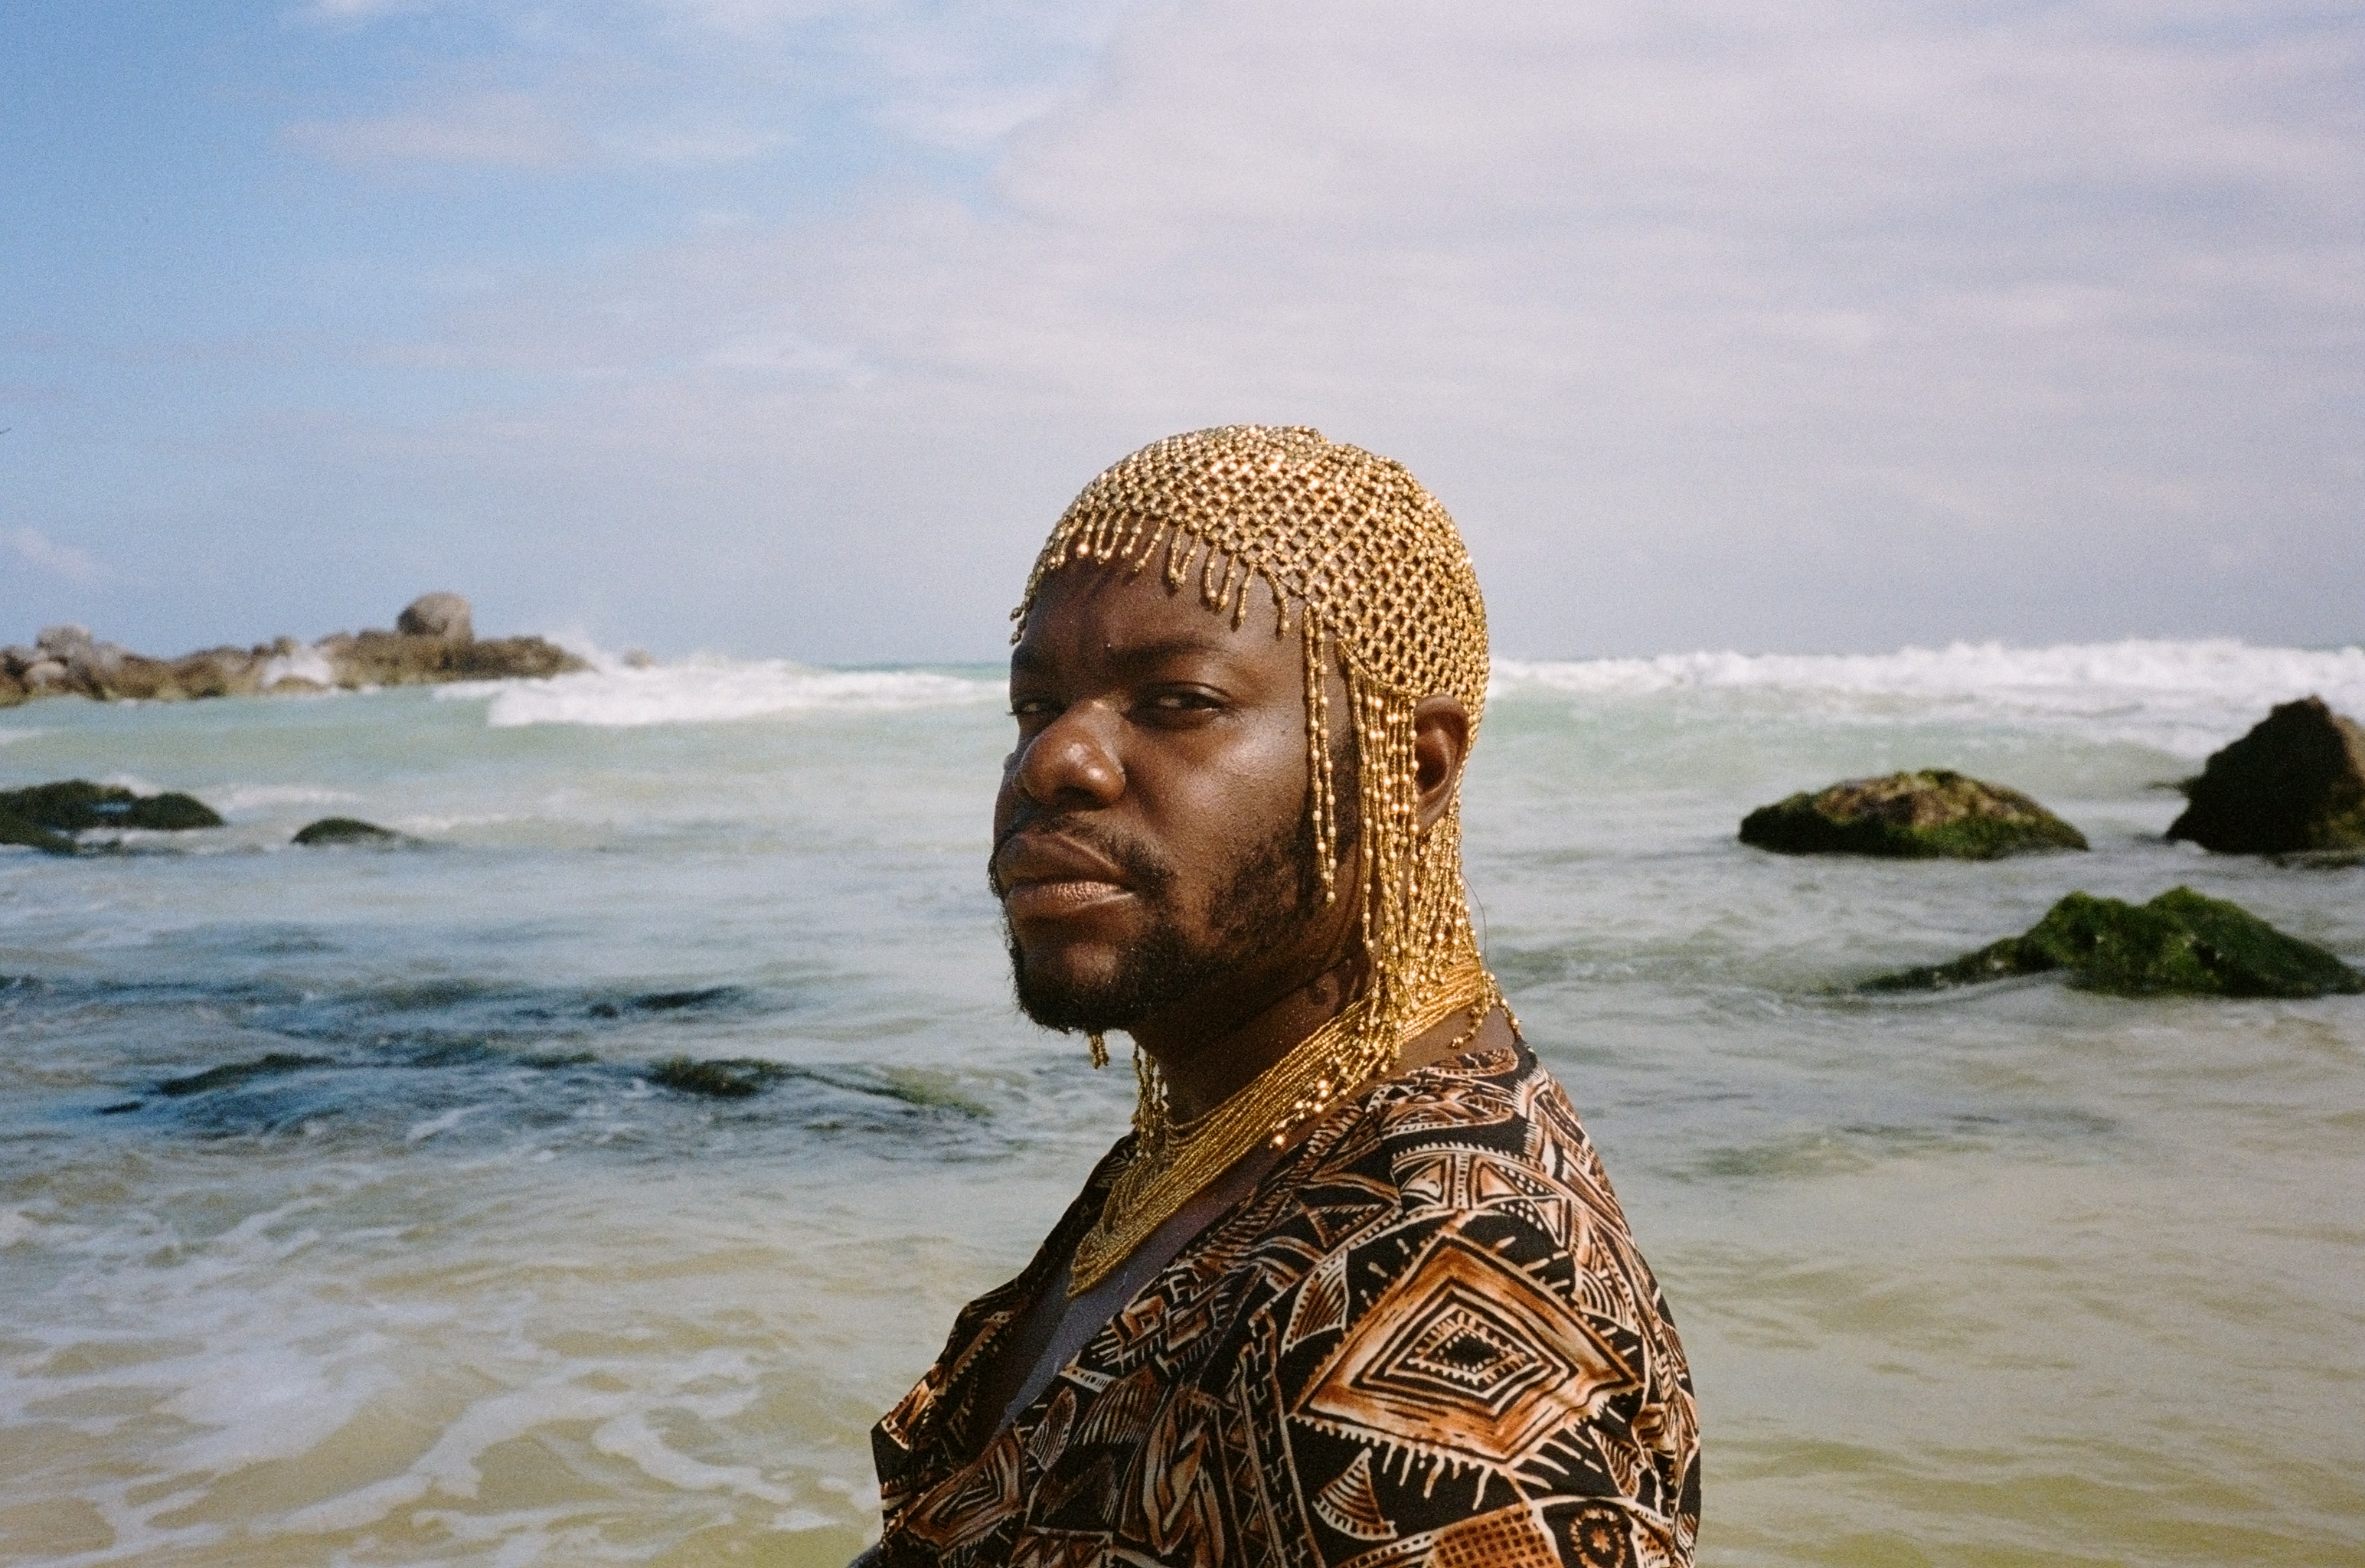 jaamil olawale kosoko stands in front of a light blue body of water, looking into the camera. jaamil is wearing a top with gold and black print and a beaded gold headpiece.